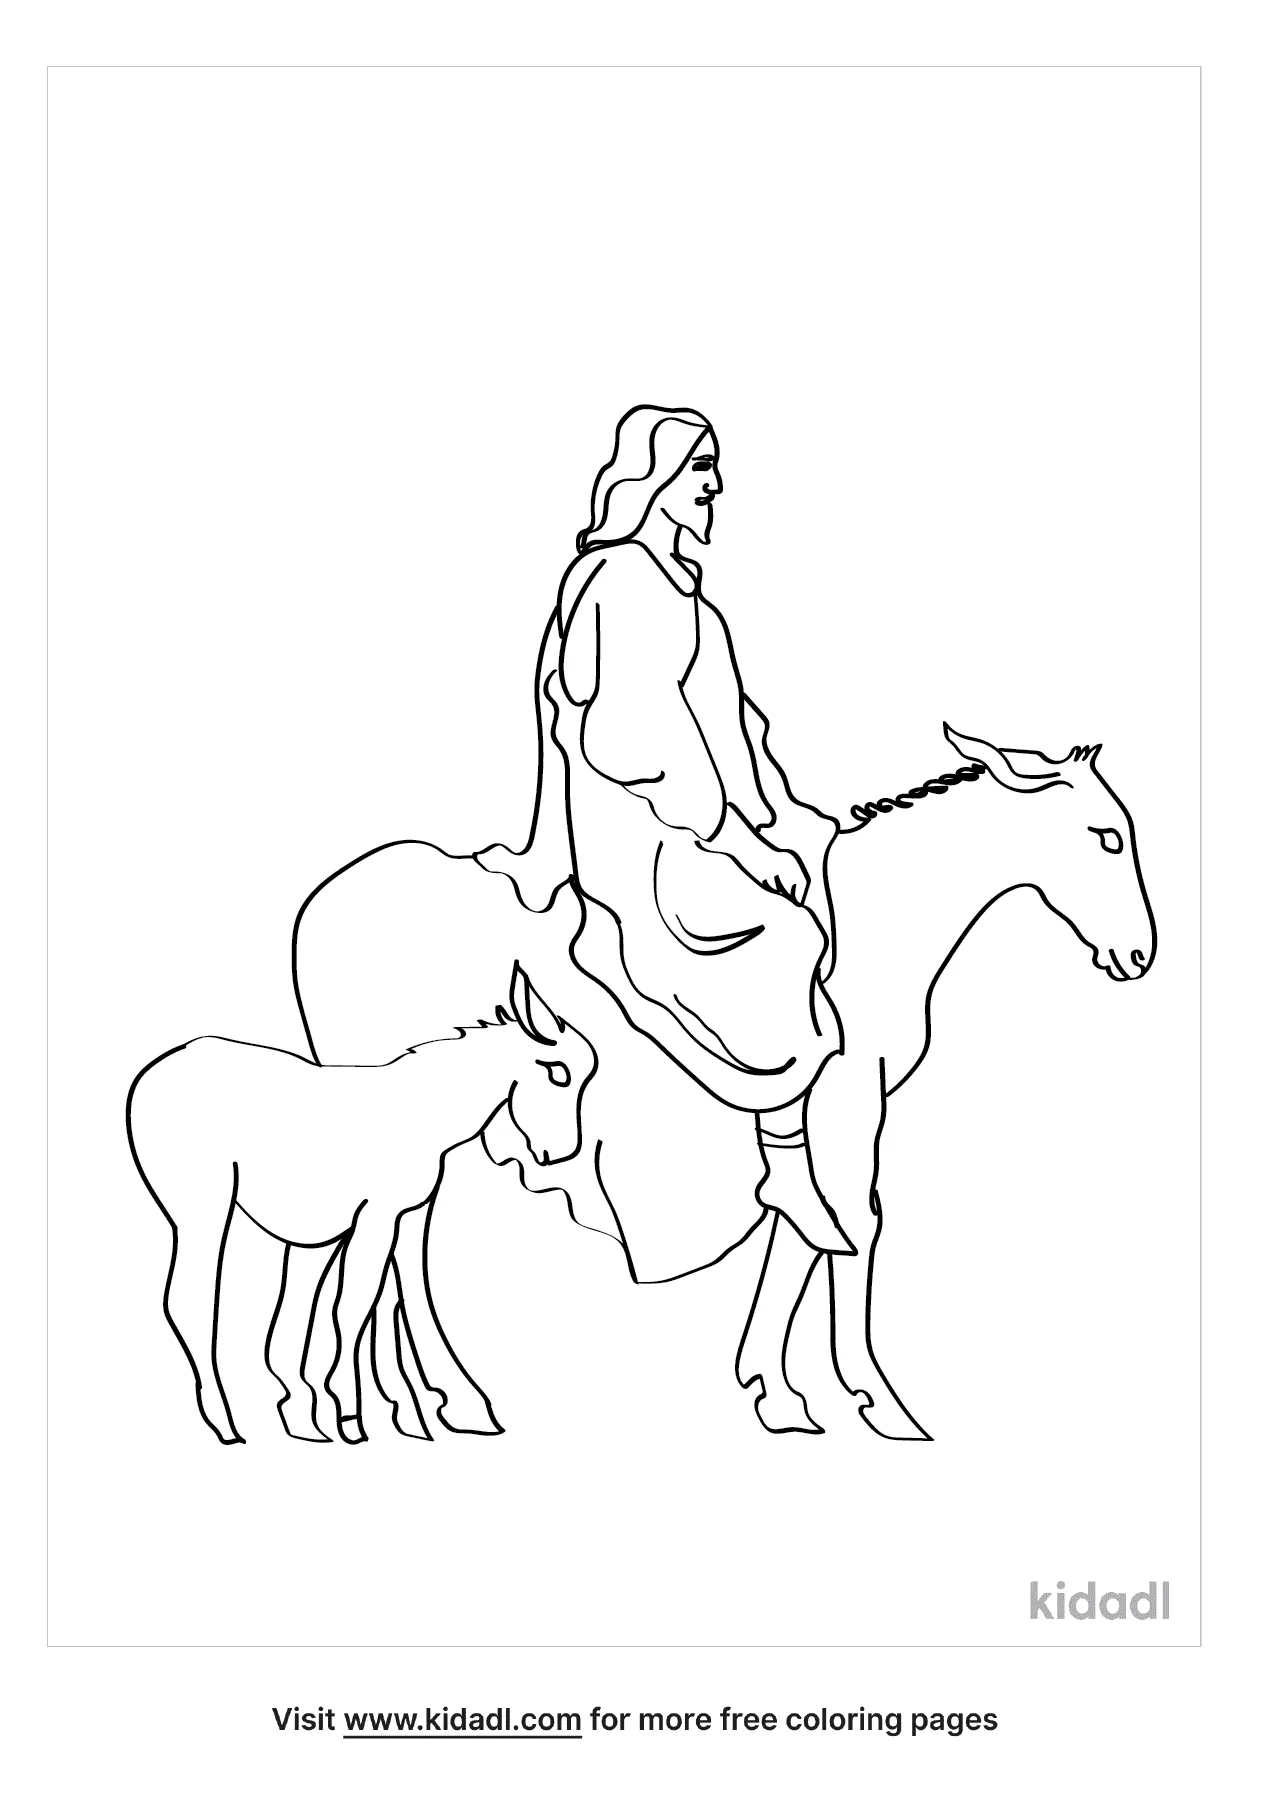 joseph and mary on donkey coloring pages